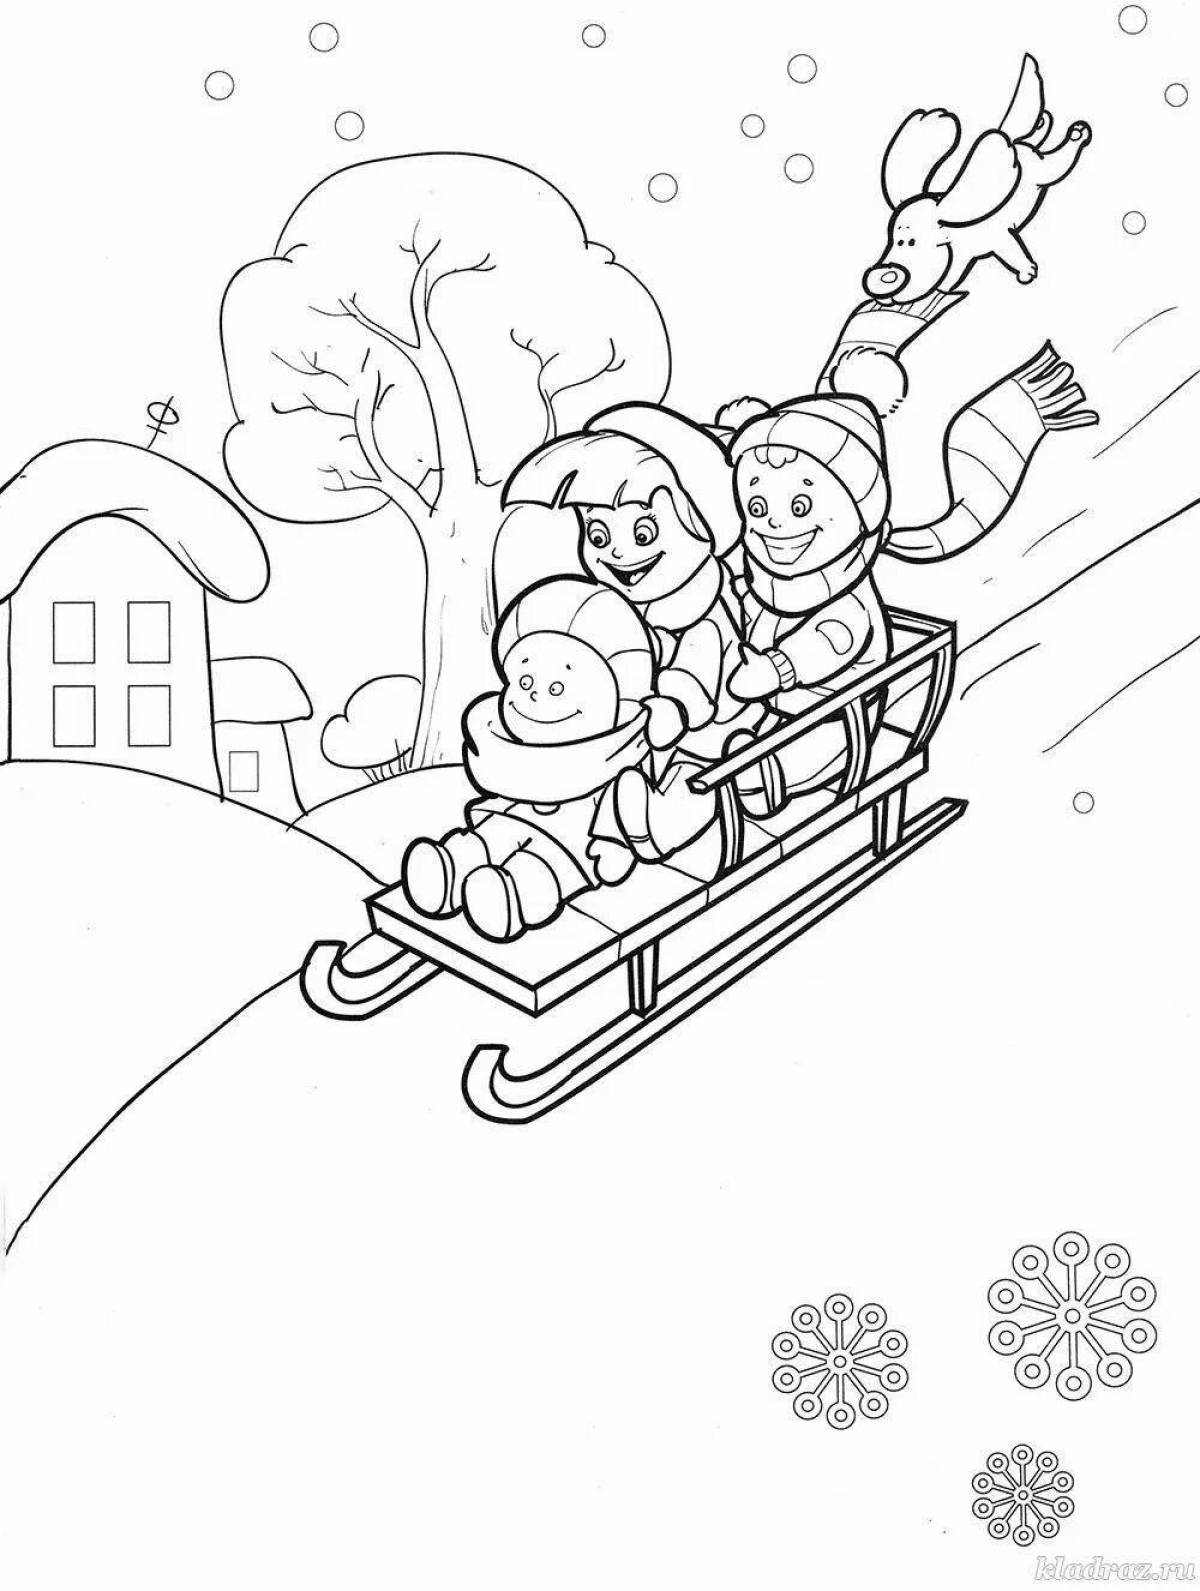 Live coloring on a sled